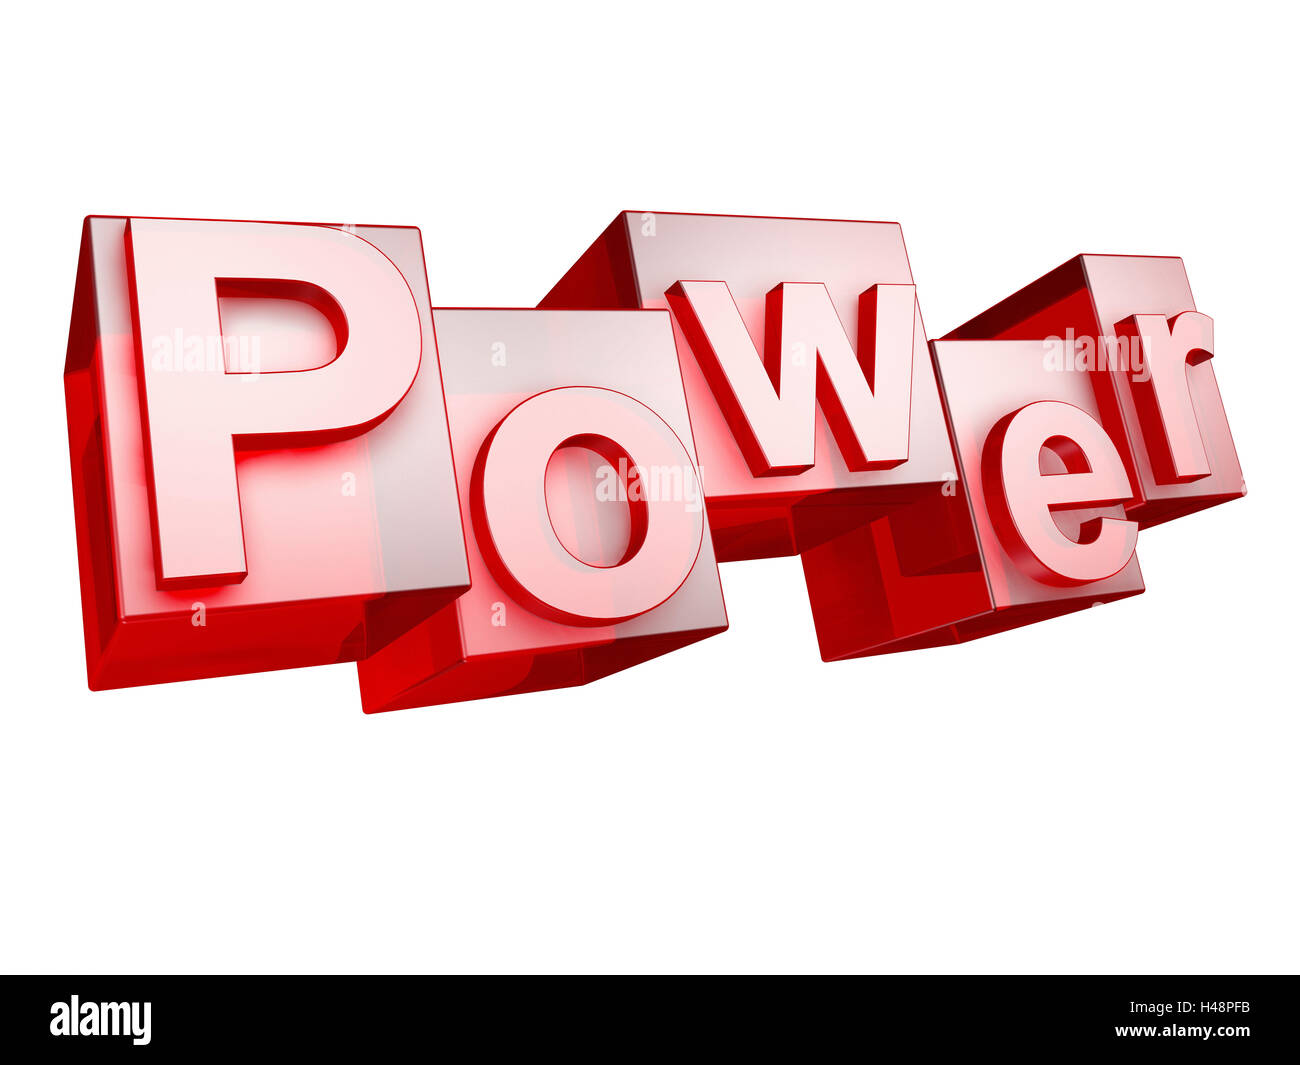 Power, red, white background, word, letter, 3-D, technology, effect, character font, idea, conception, nobody, Frei's plate, tip, sign, Stock Photo